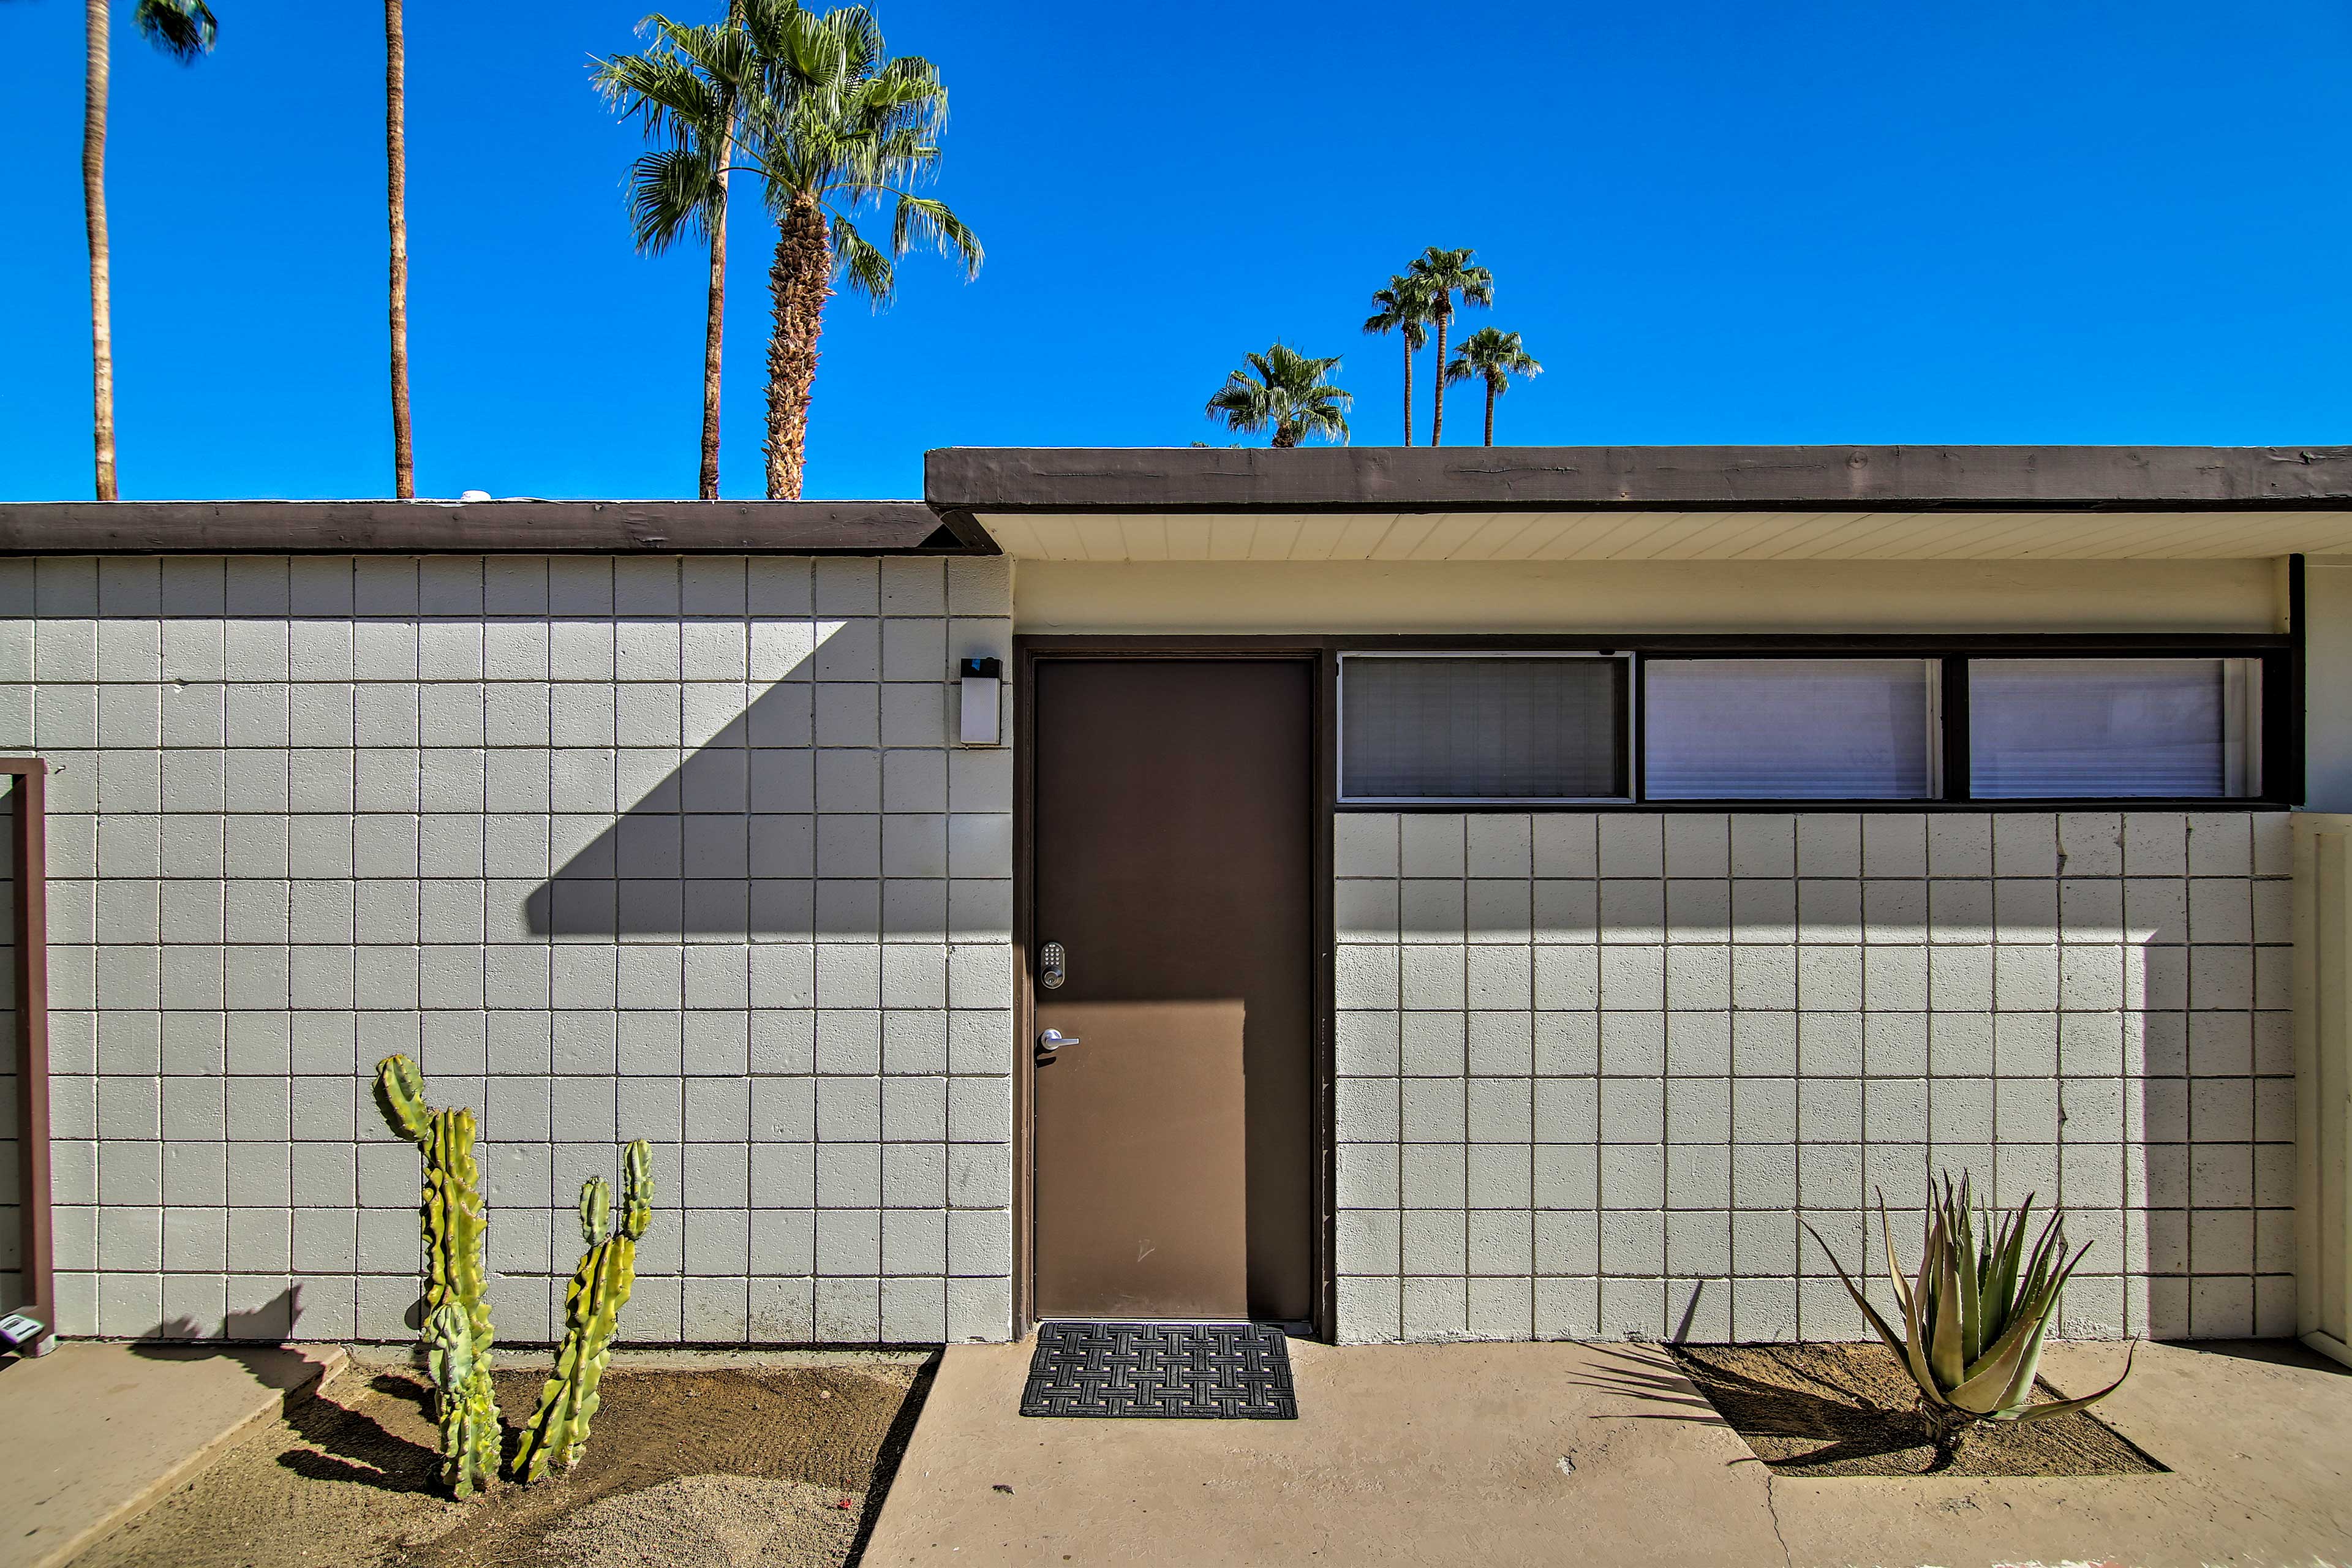 This Palm Springs home base has room for 2.